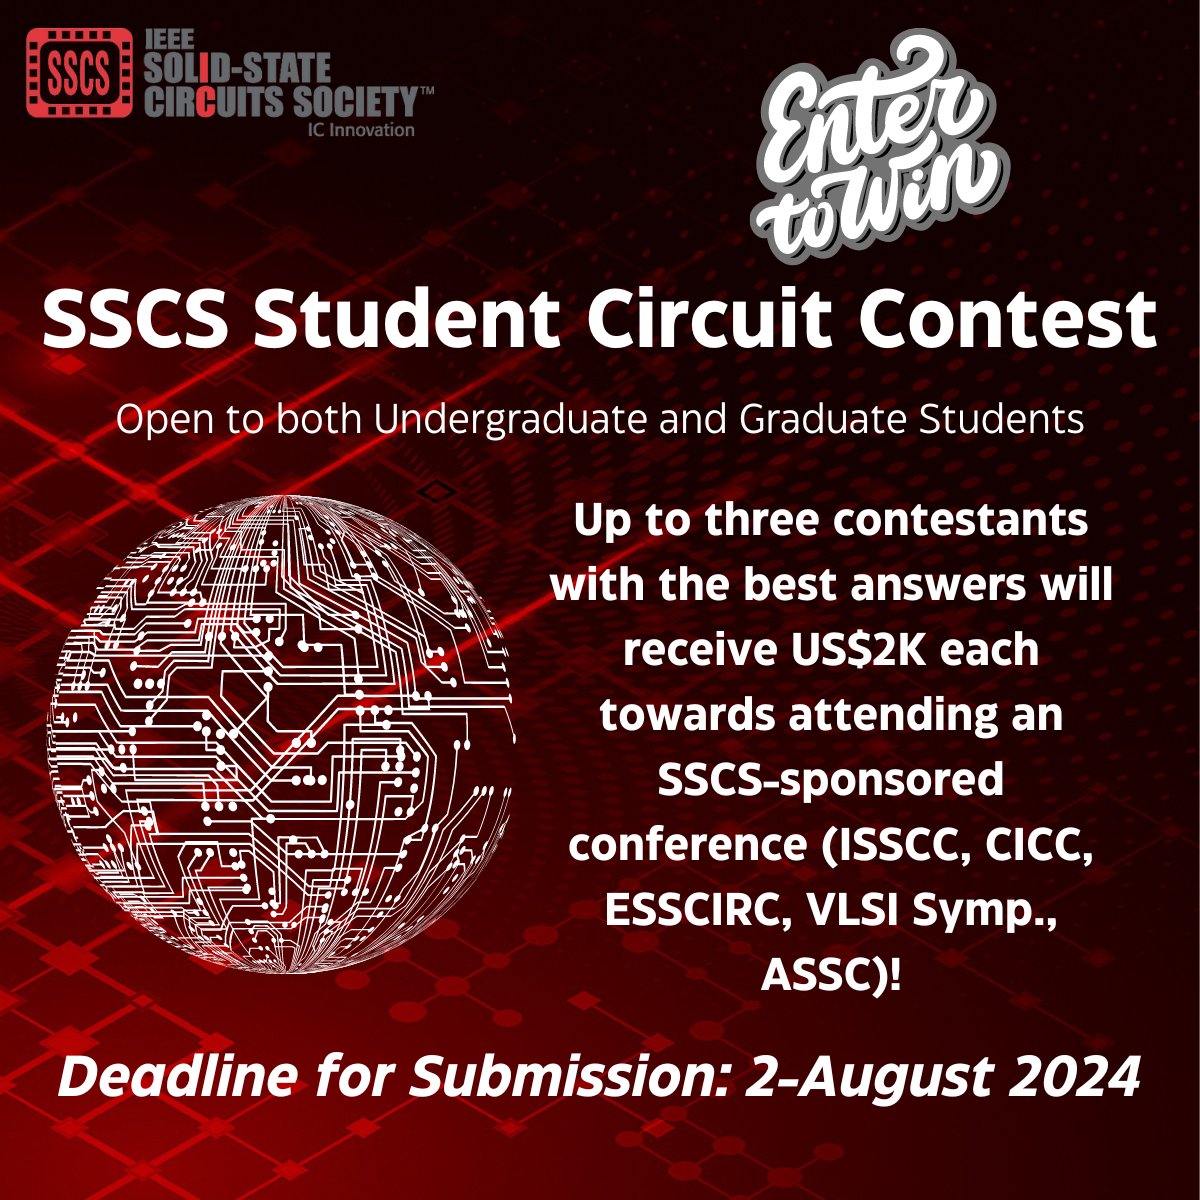 Reminder: The 2024 SSCS Student Circuit Contest is OPEN! Deadline to submit is 2-Aug. The goal of this challenge is to design an integrated circuit by using the greatest number of components picked from the provided list. Learn More: bit.ly/3Jdp0Qq